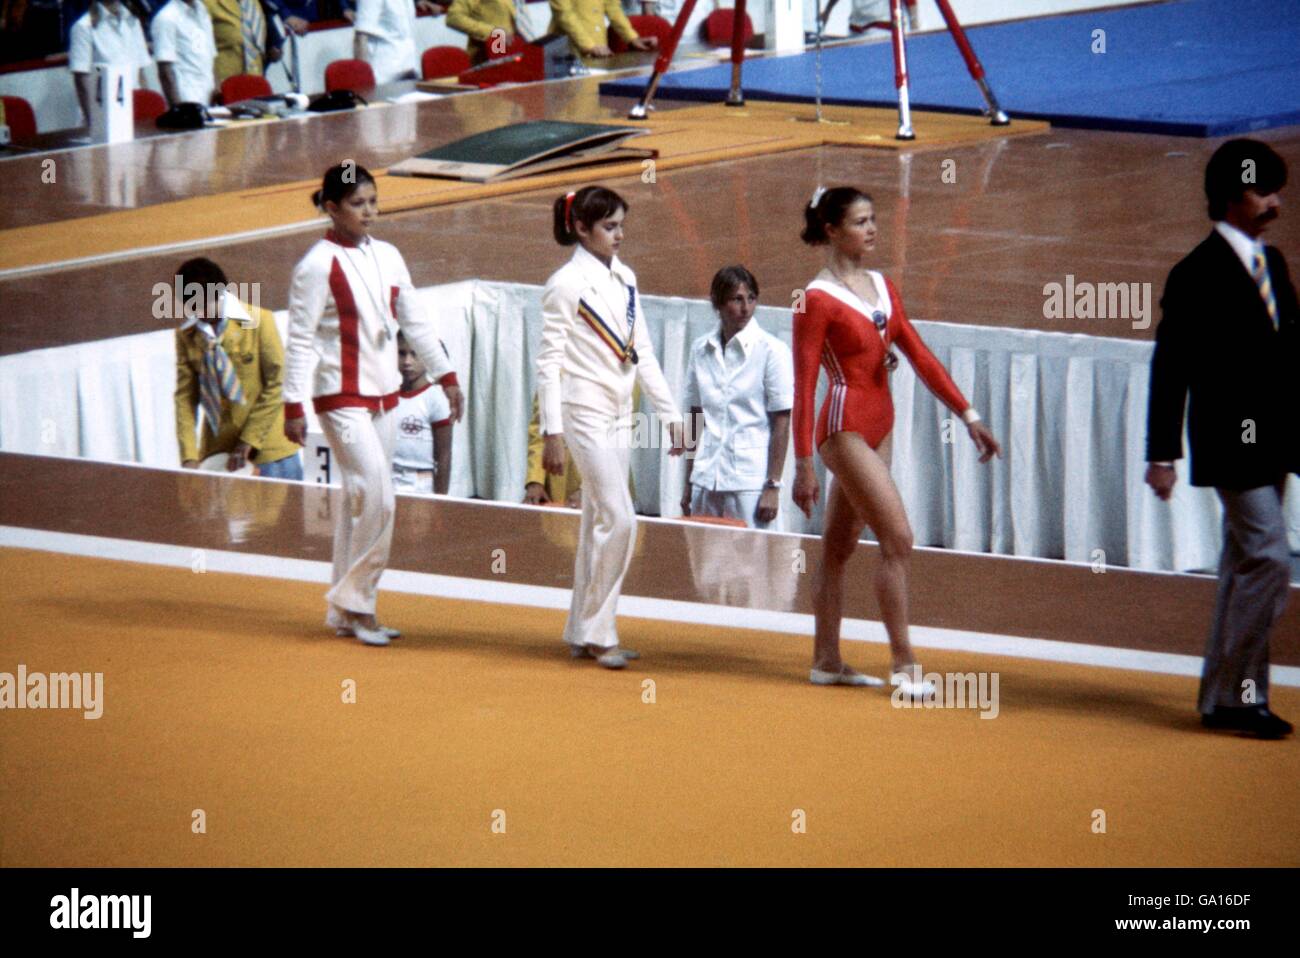 (L-R) The medallists in the women's all-around walk back to the changing rooms after receiving their medals: USSR's Nelli Kim (silver), Romania's Nadia Comaneci (gold) and USSR's Lyudmila Tourischeva (bronze) Stock Photo